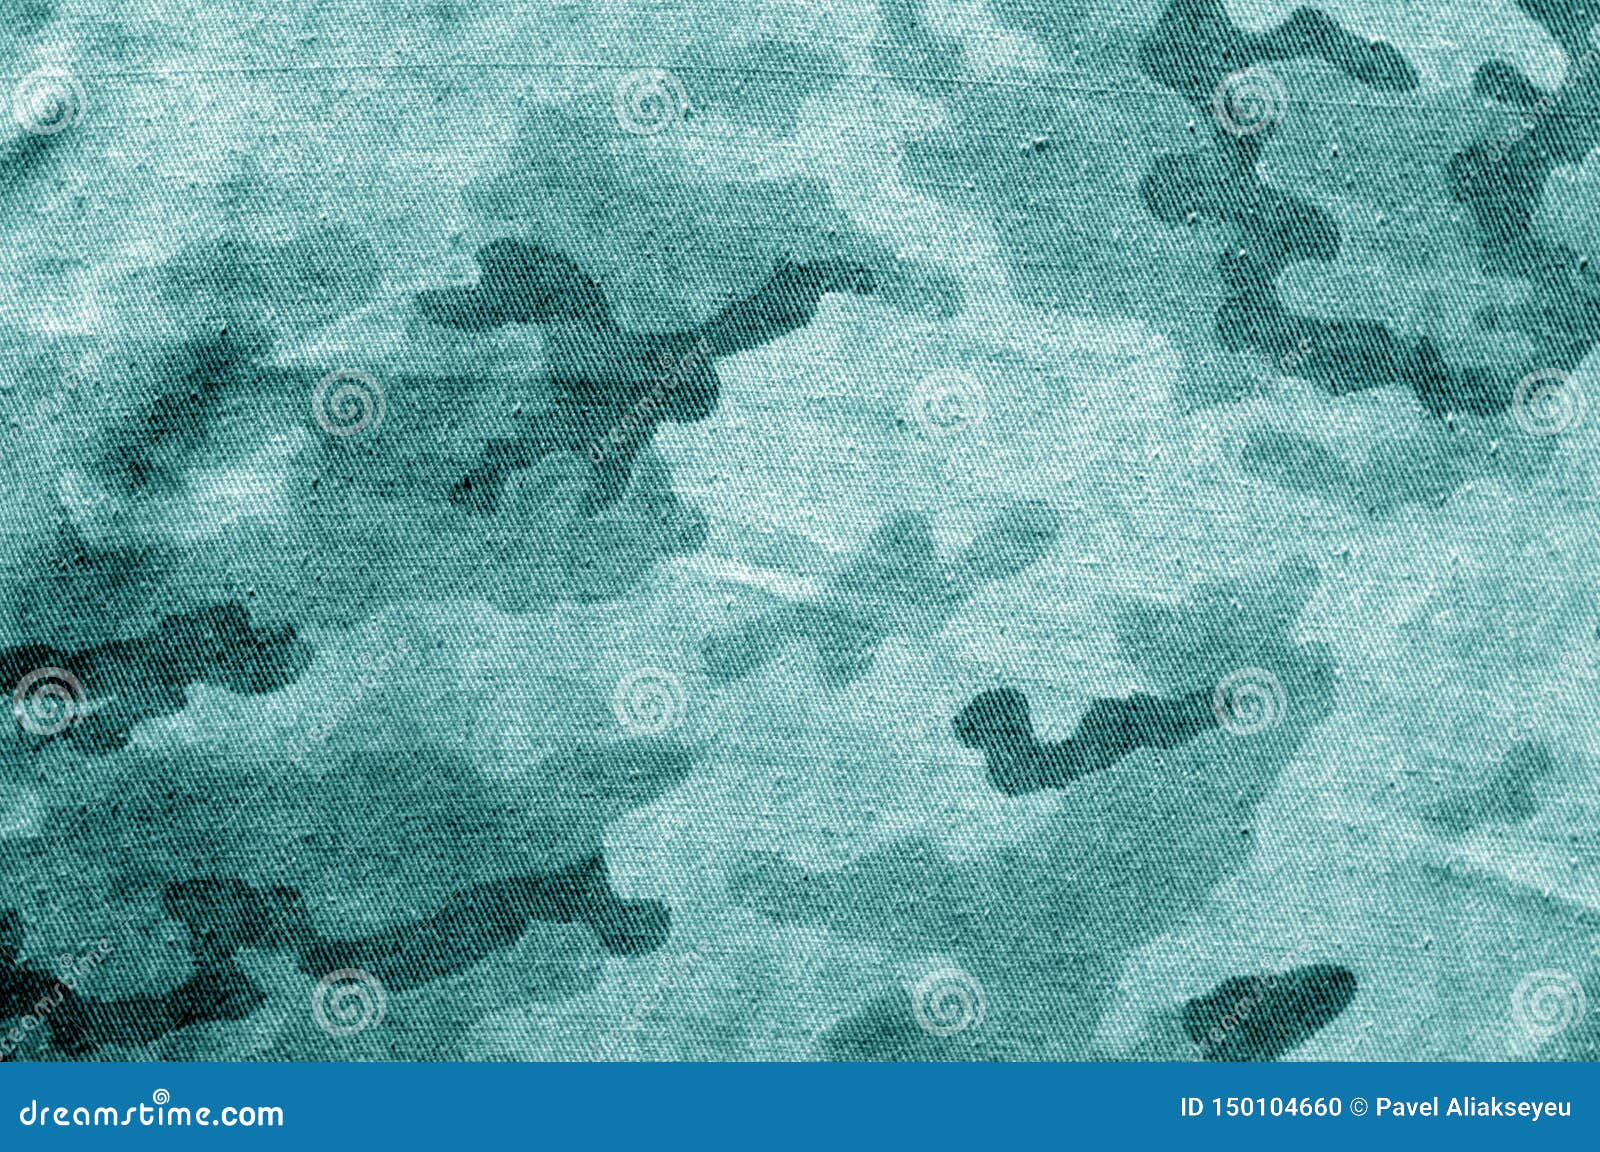 Dirty Camouflage Cloth in Cyan Tone Stock Photo - Image of closeup ...